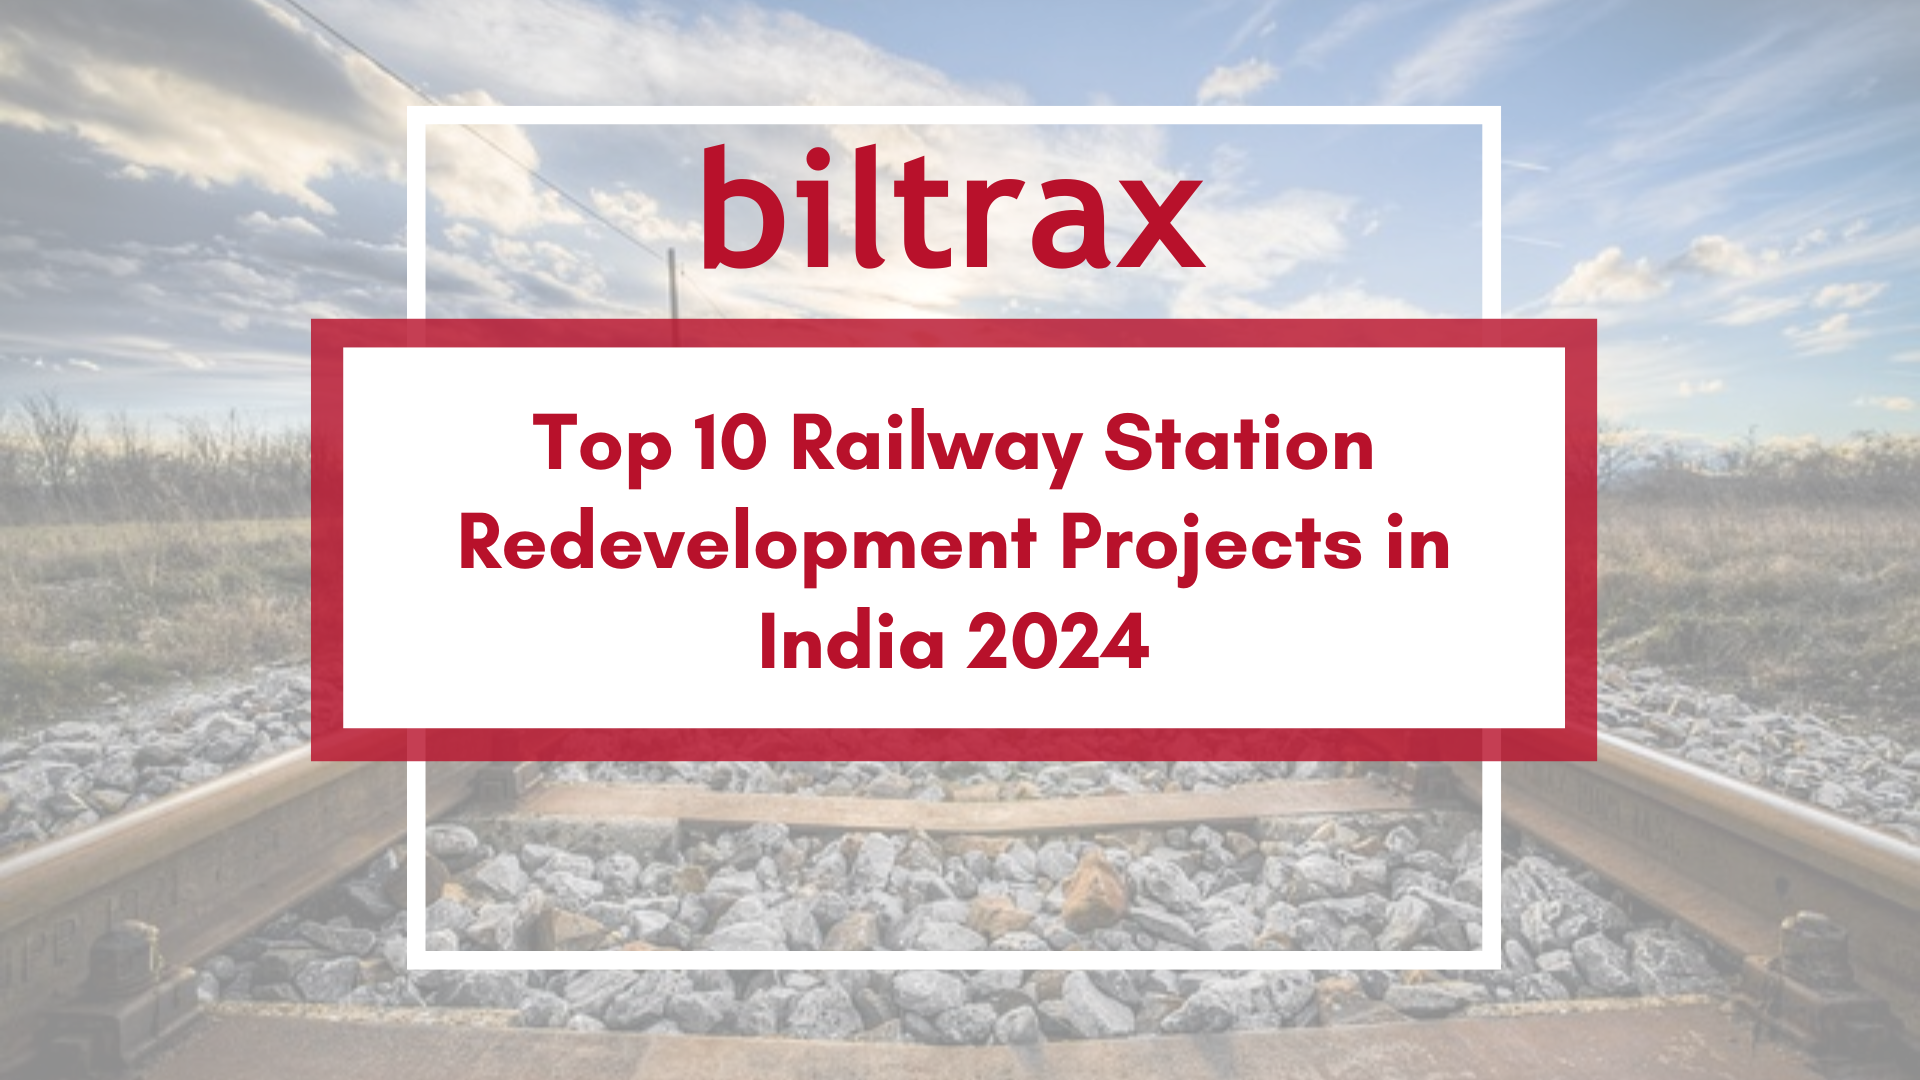 Top 10 Railway station redevelopment projects in India